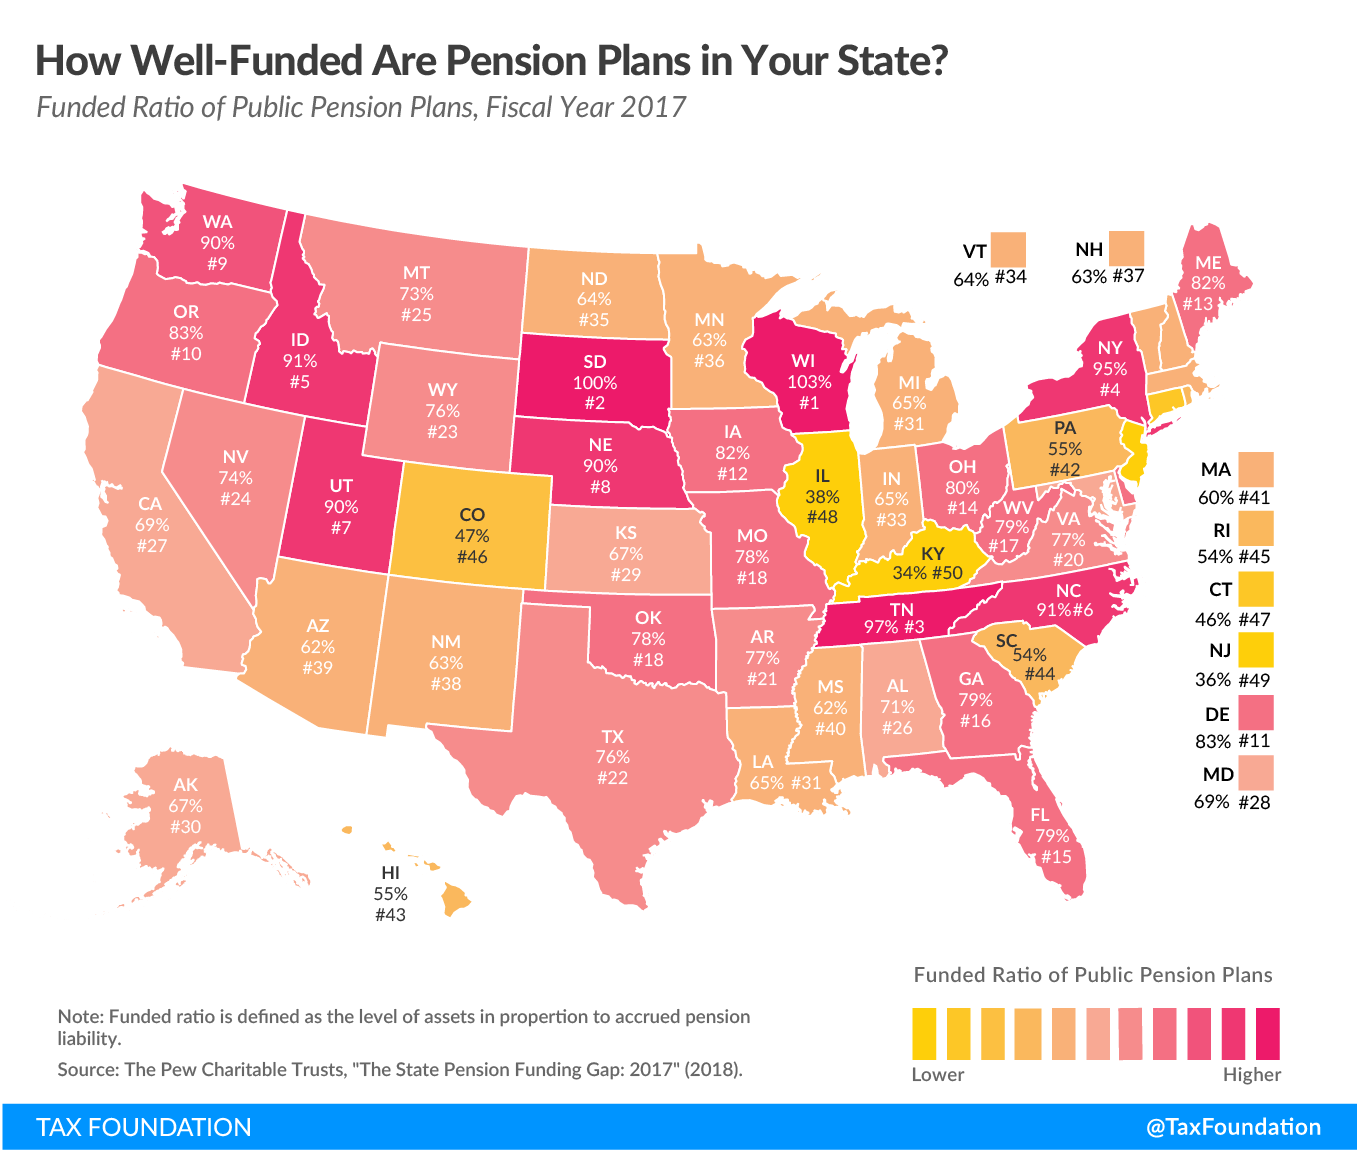 How Well Funded Are Government Employee Pension Plans Funded In Your State?